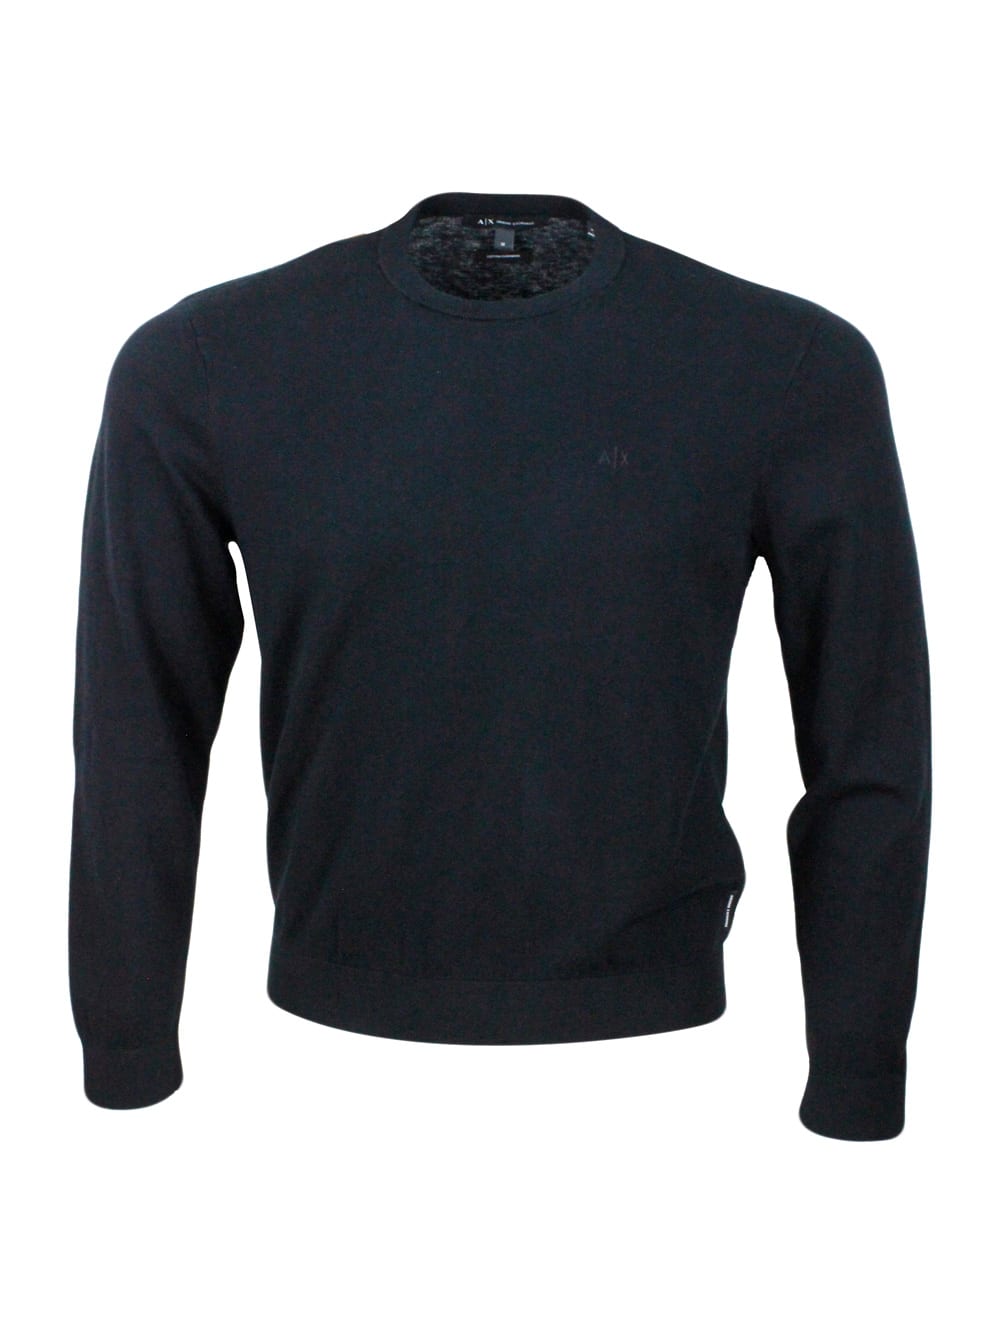 Armani Collezioni Lightweight Crew-neck Long-sleeved Jumper Made Of Warm Cotton And Cashmere With Contrasting Colour P In Black